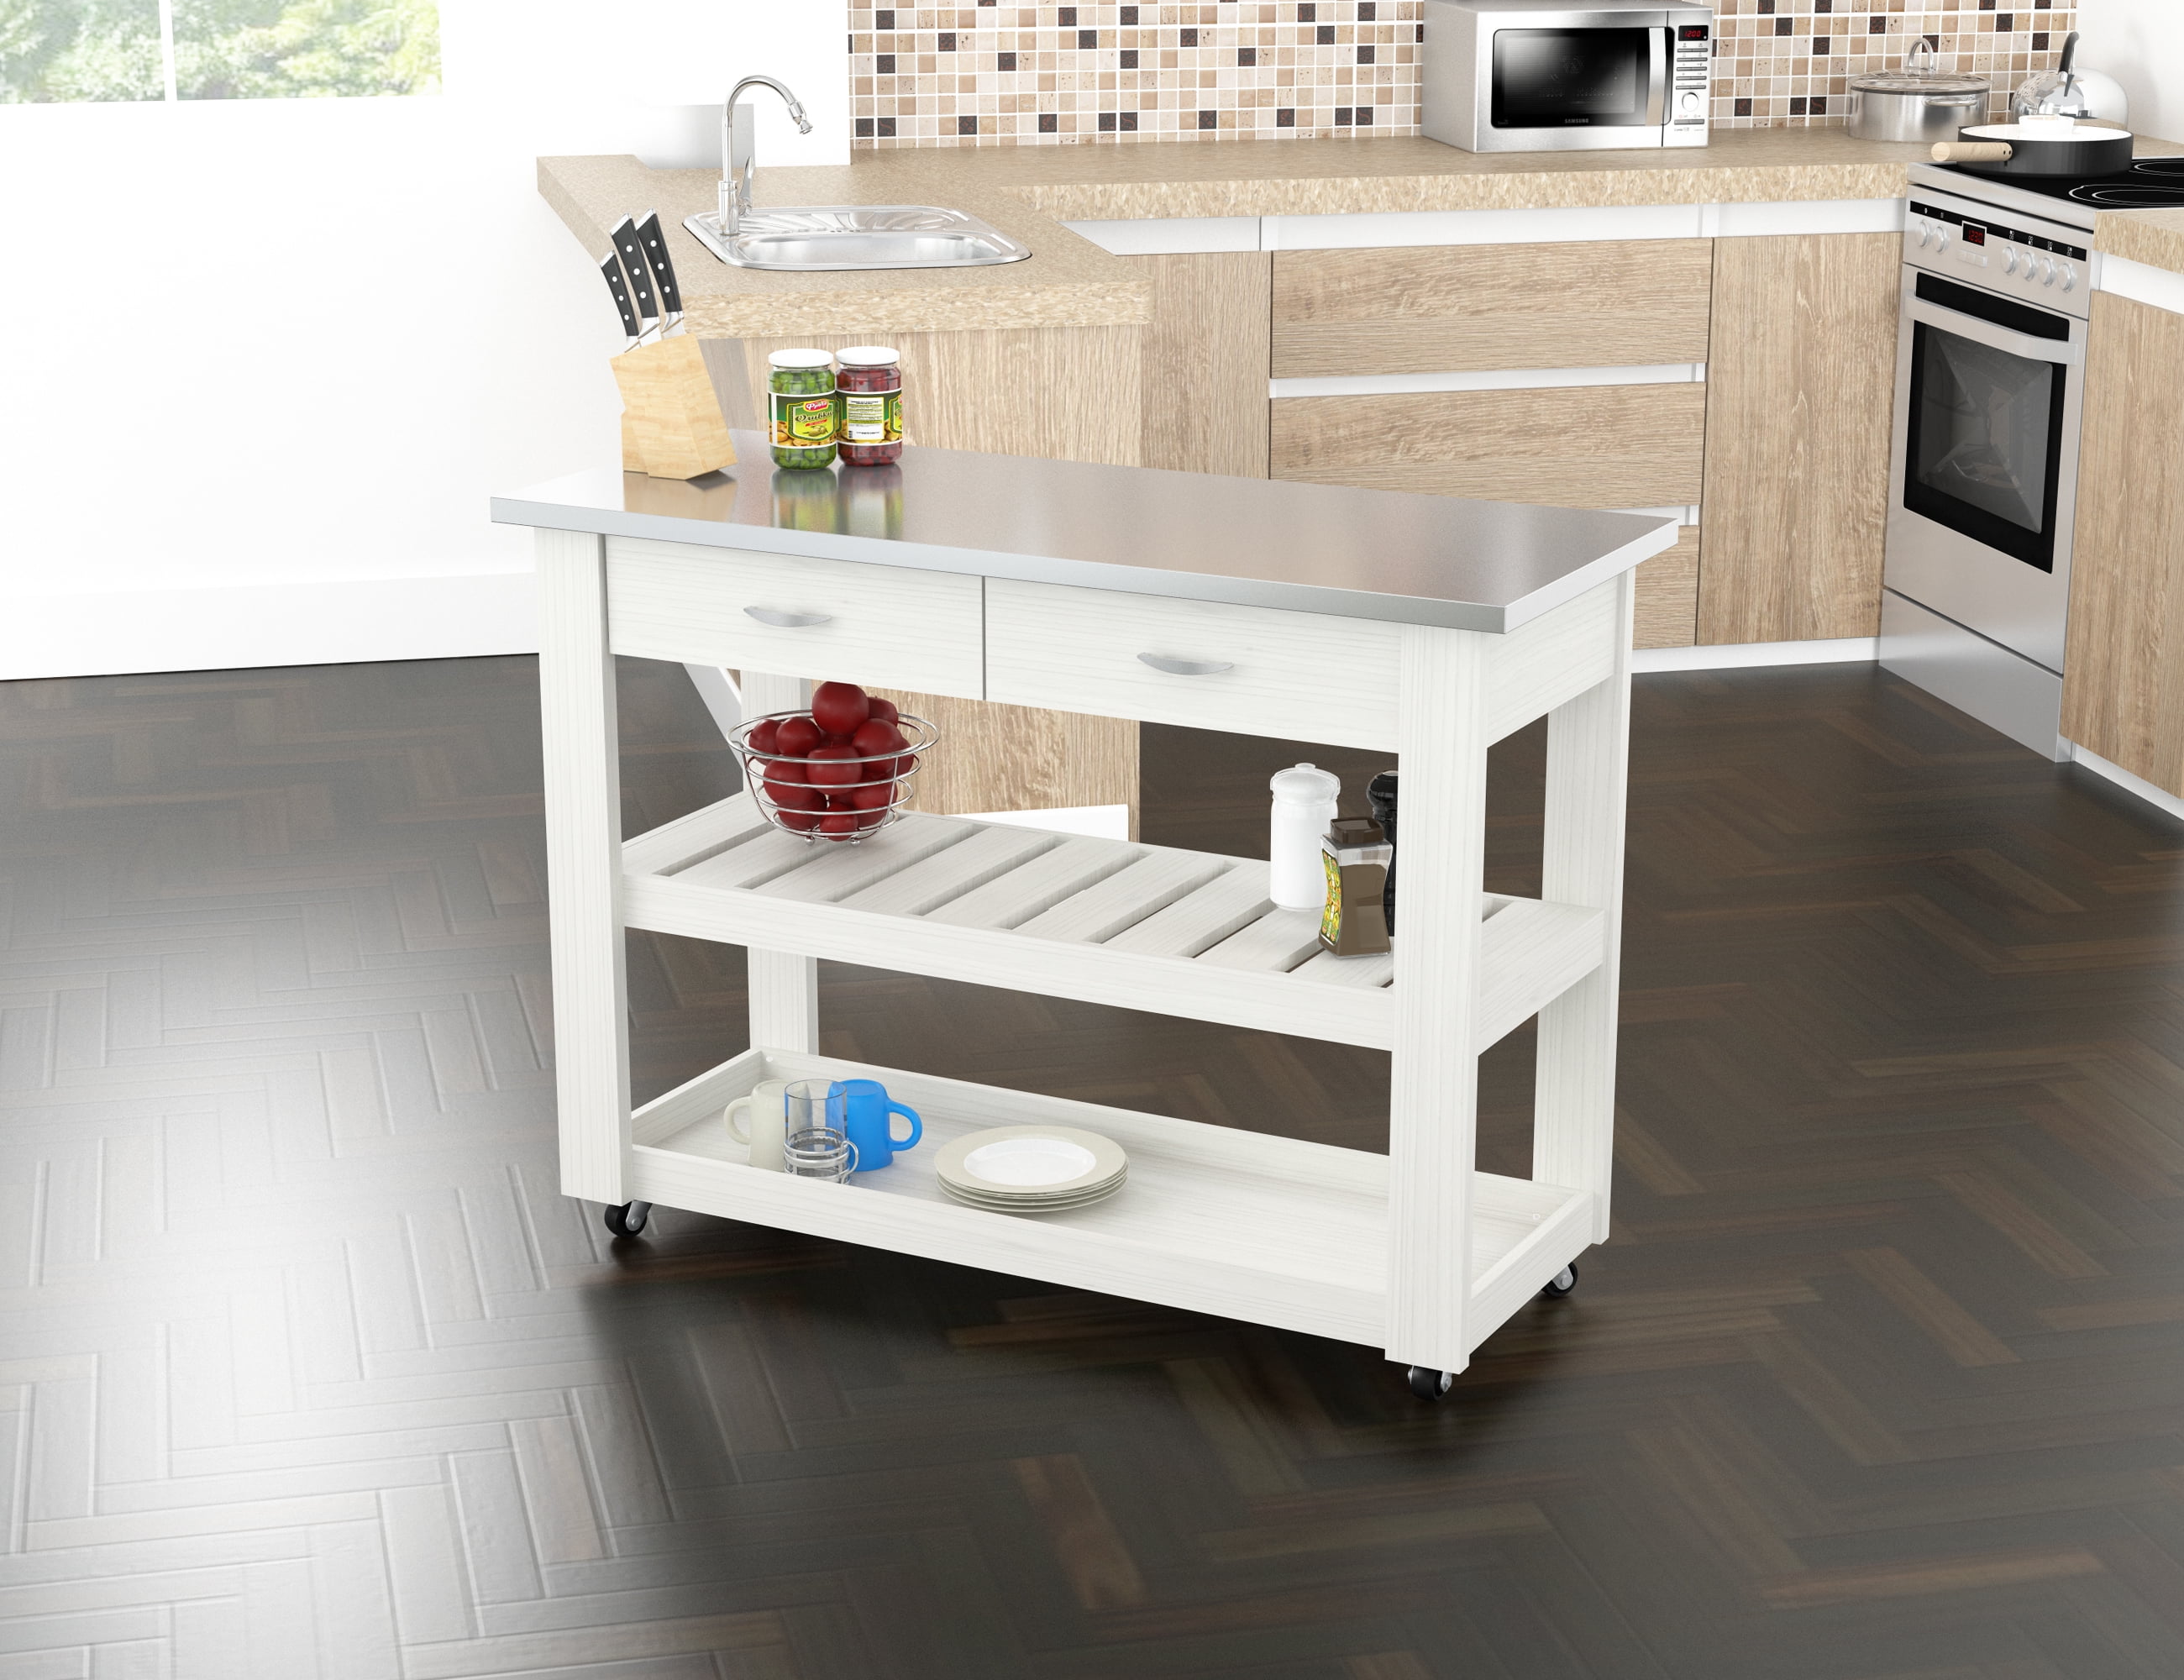 Inval Mobile Kitchen Cart with Stainless Steel Top Laricina